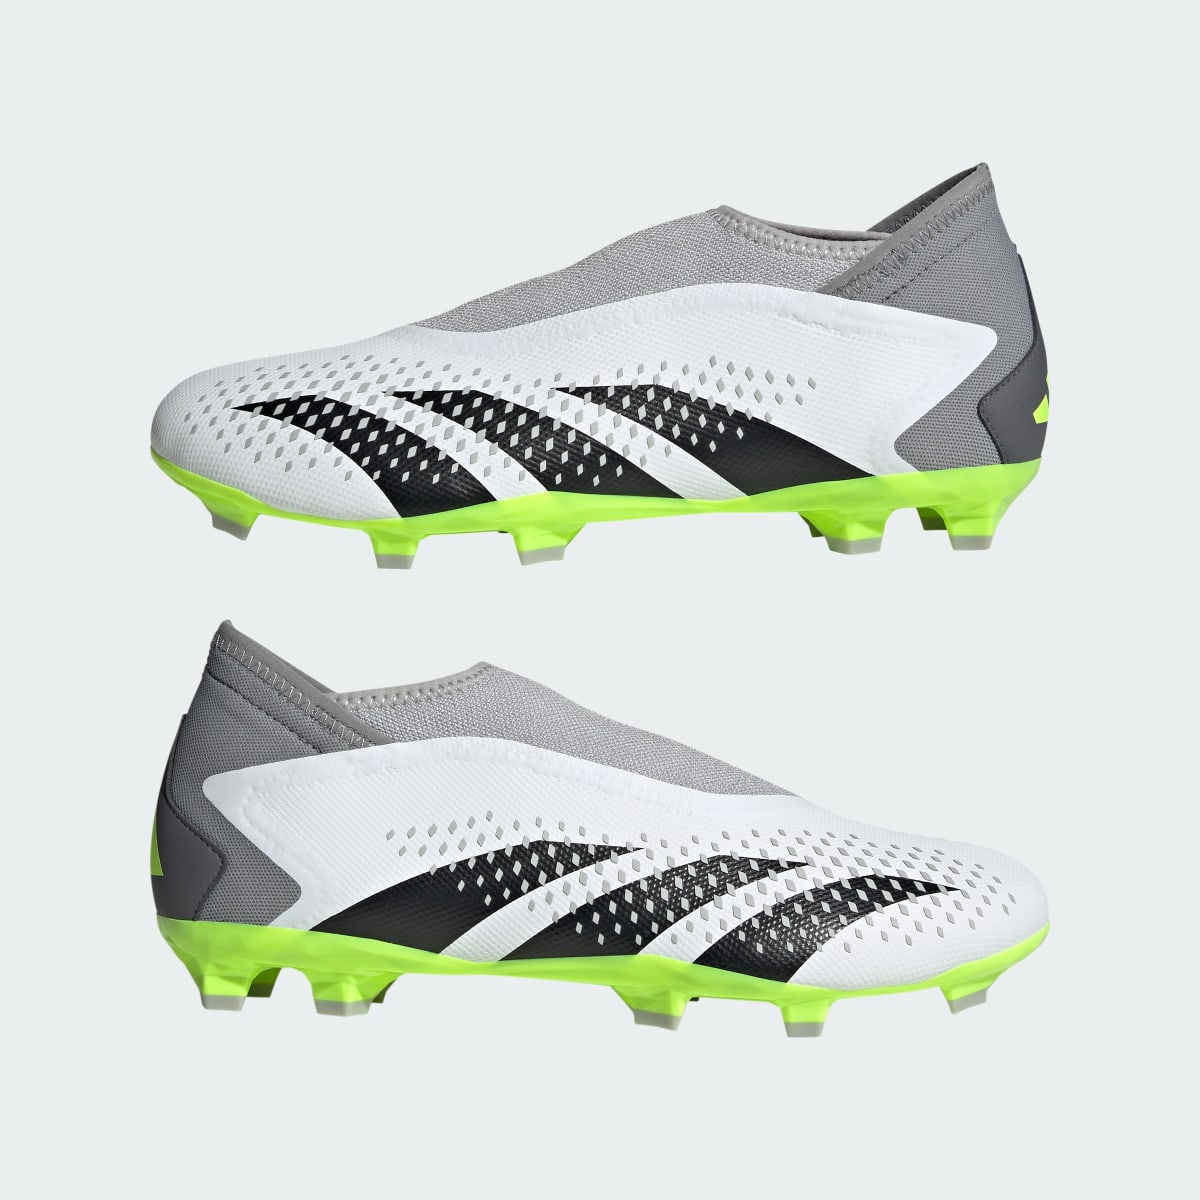 Adidas Predator Accuracy.3 Laceless Firm Ground Boots. 8